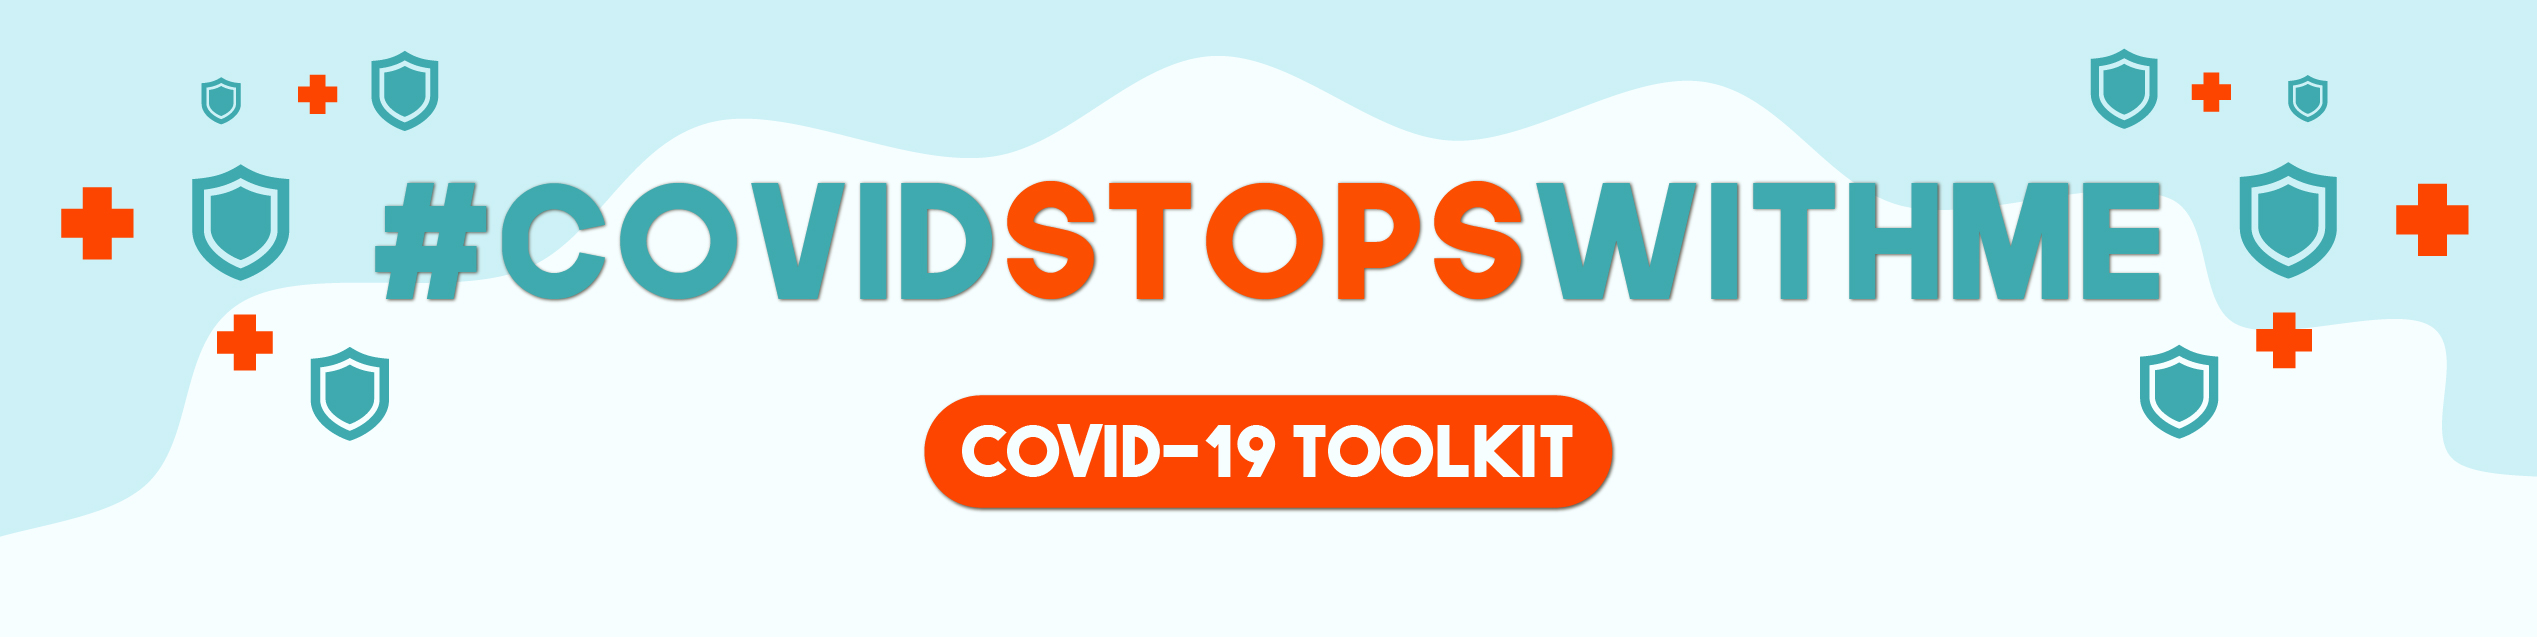 COVID-19 #COVIDStopsWithMe Toolkit